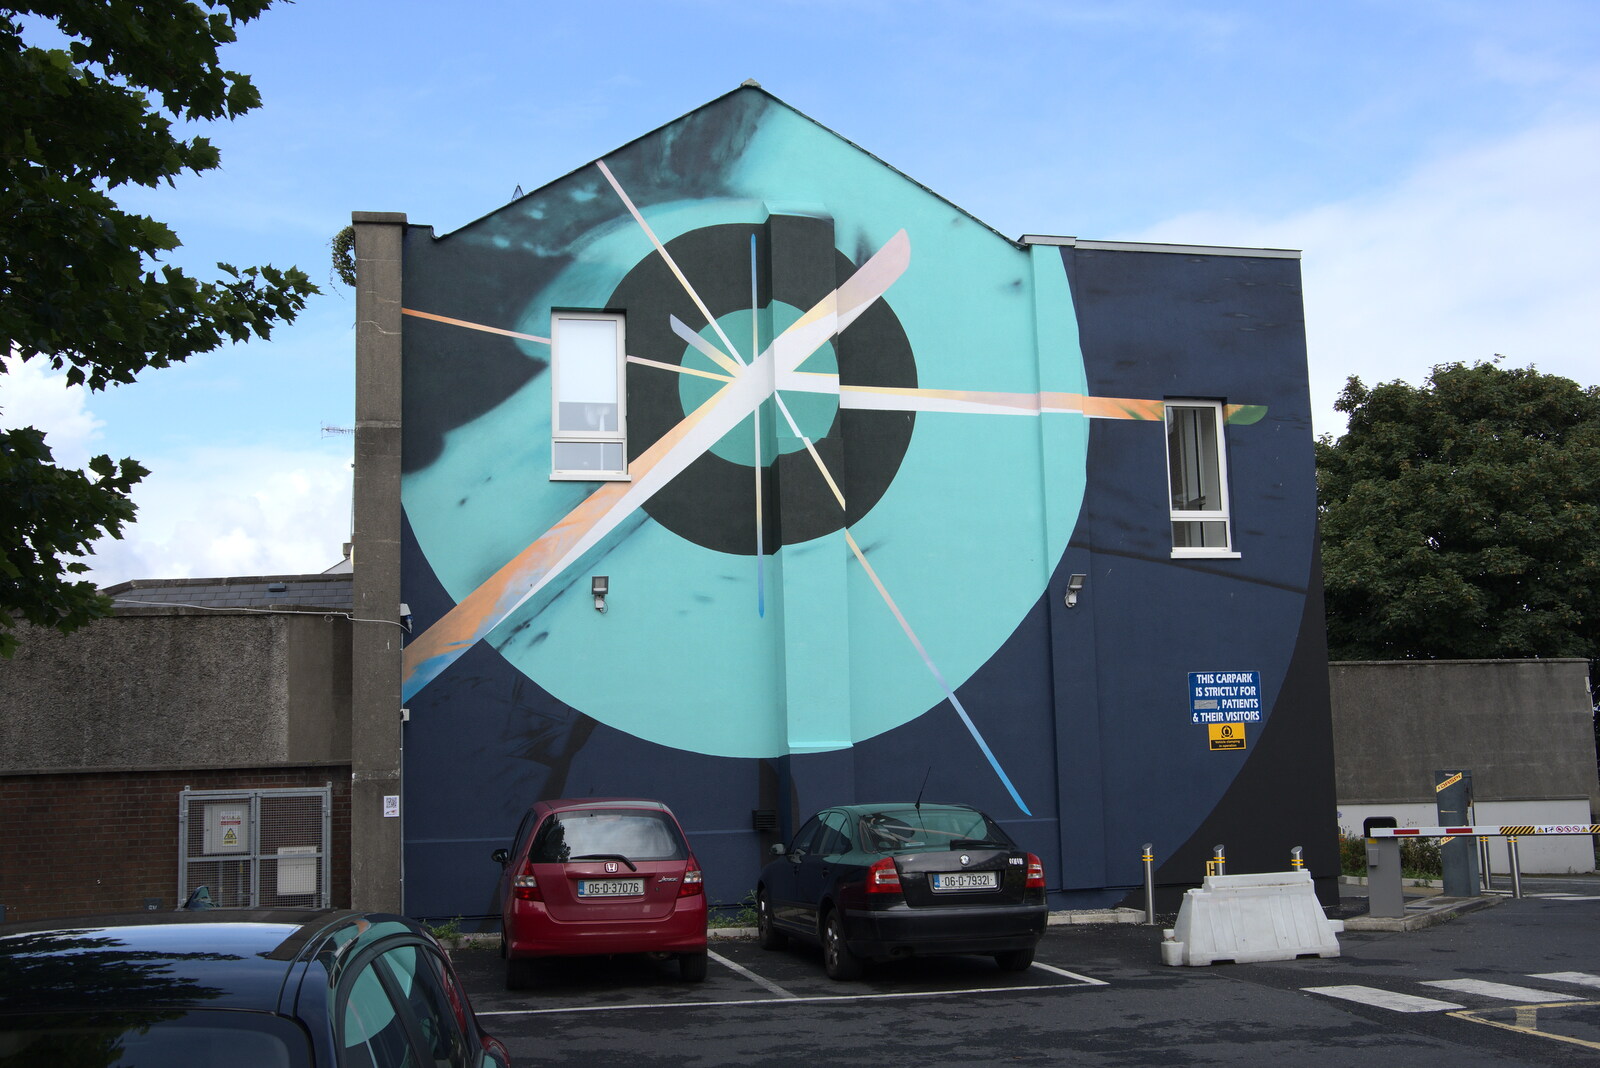 More wall art at St. Michael's hospital from Manorhamilton and the Street Art of Dún Laoghaire, Ireland - 15th August 2021